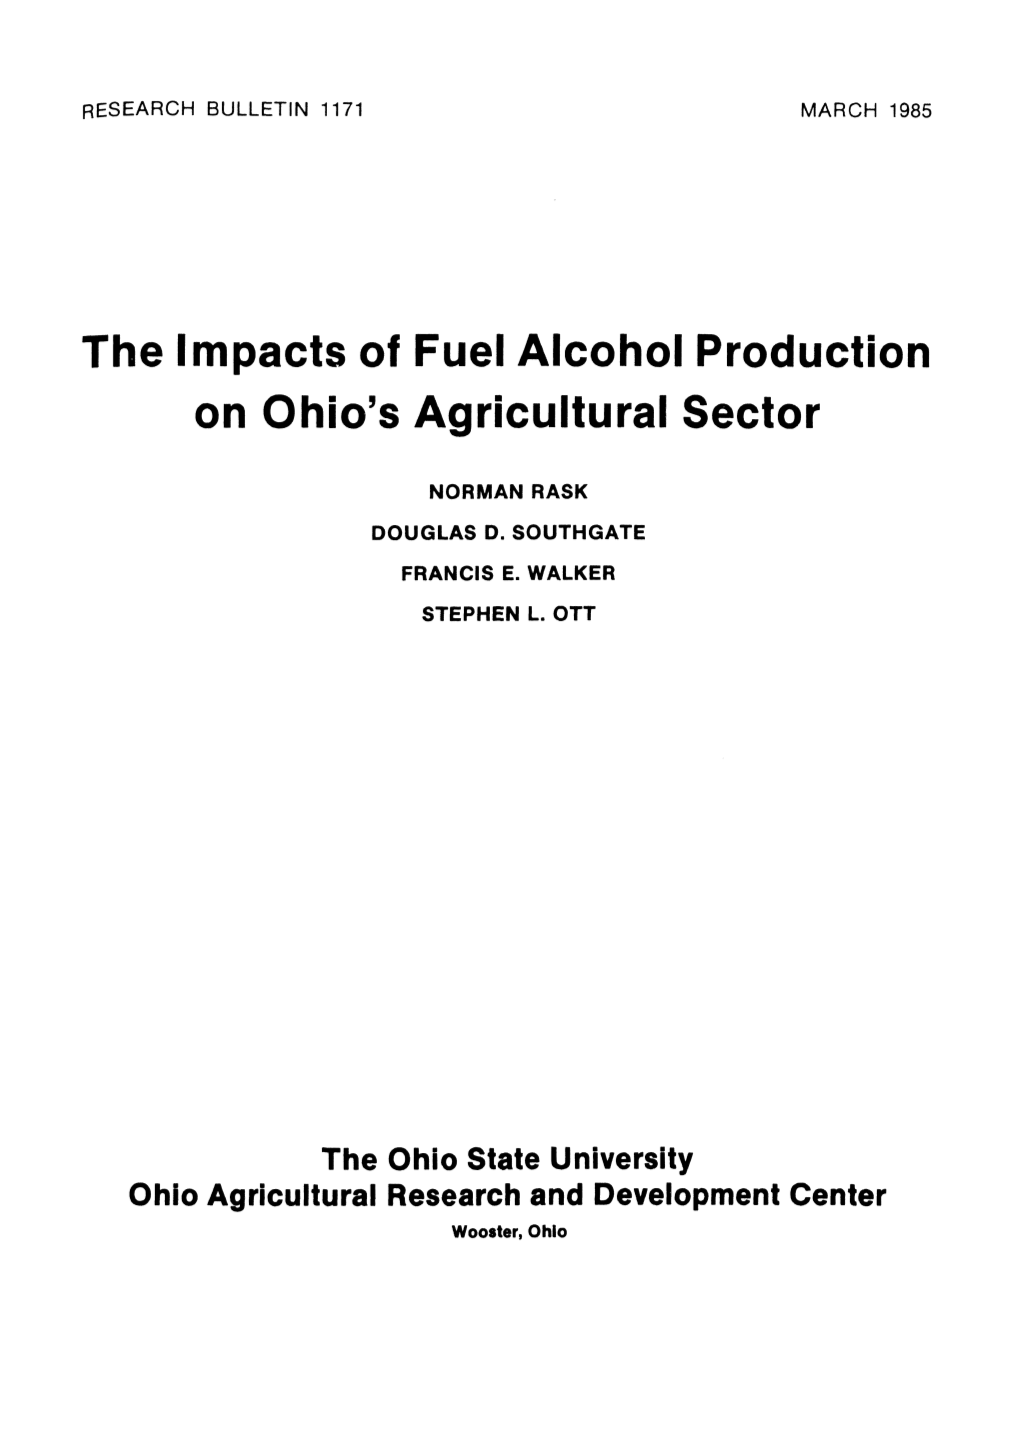 The Impacts of Fuel Alcohol Production on Ohio's Agricultural Sector